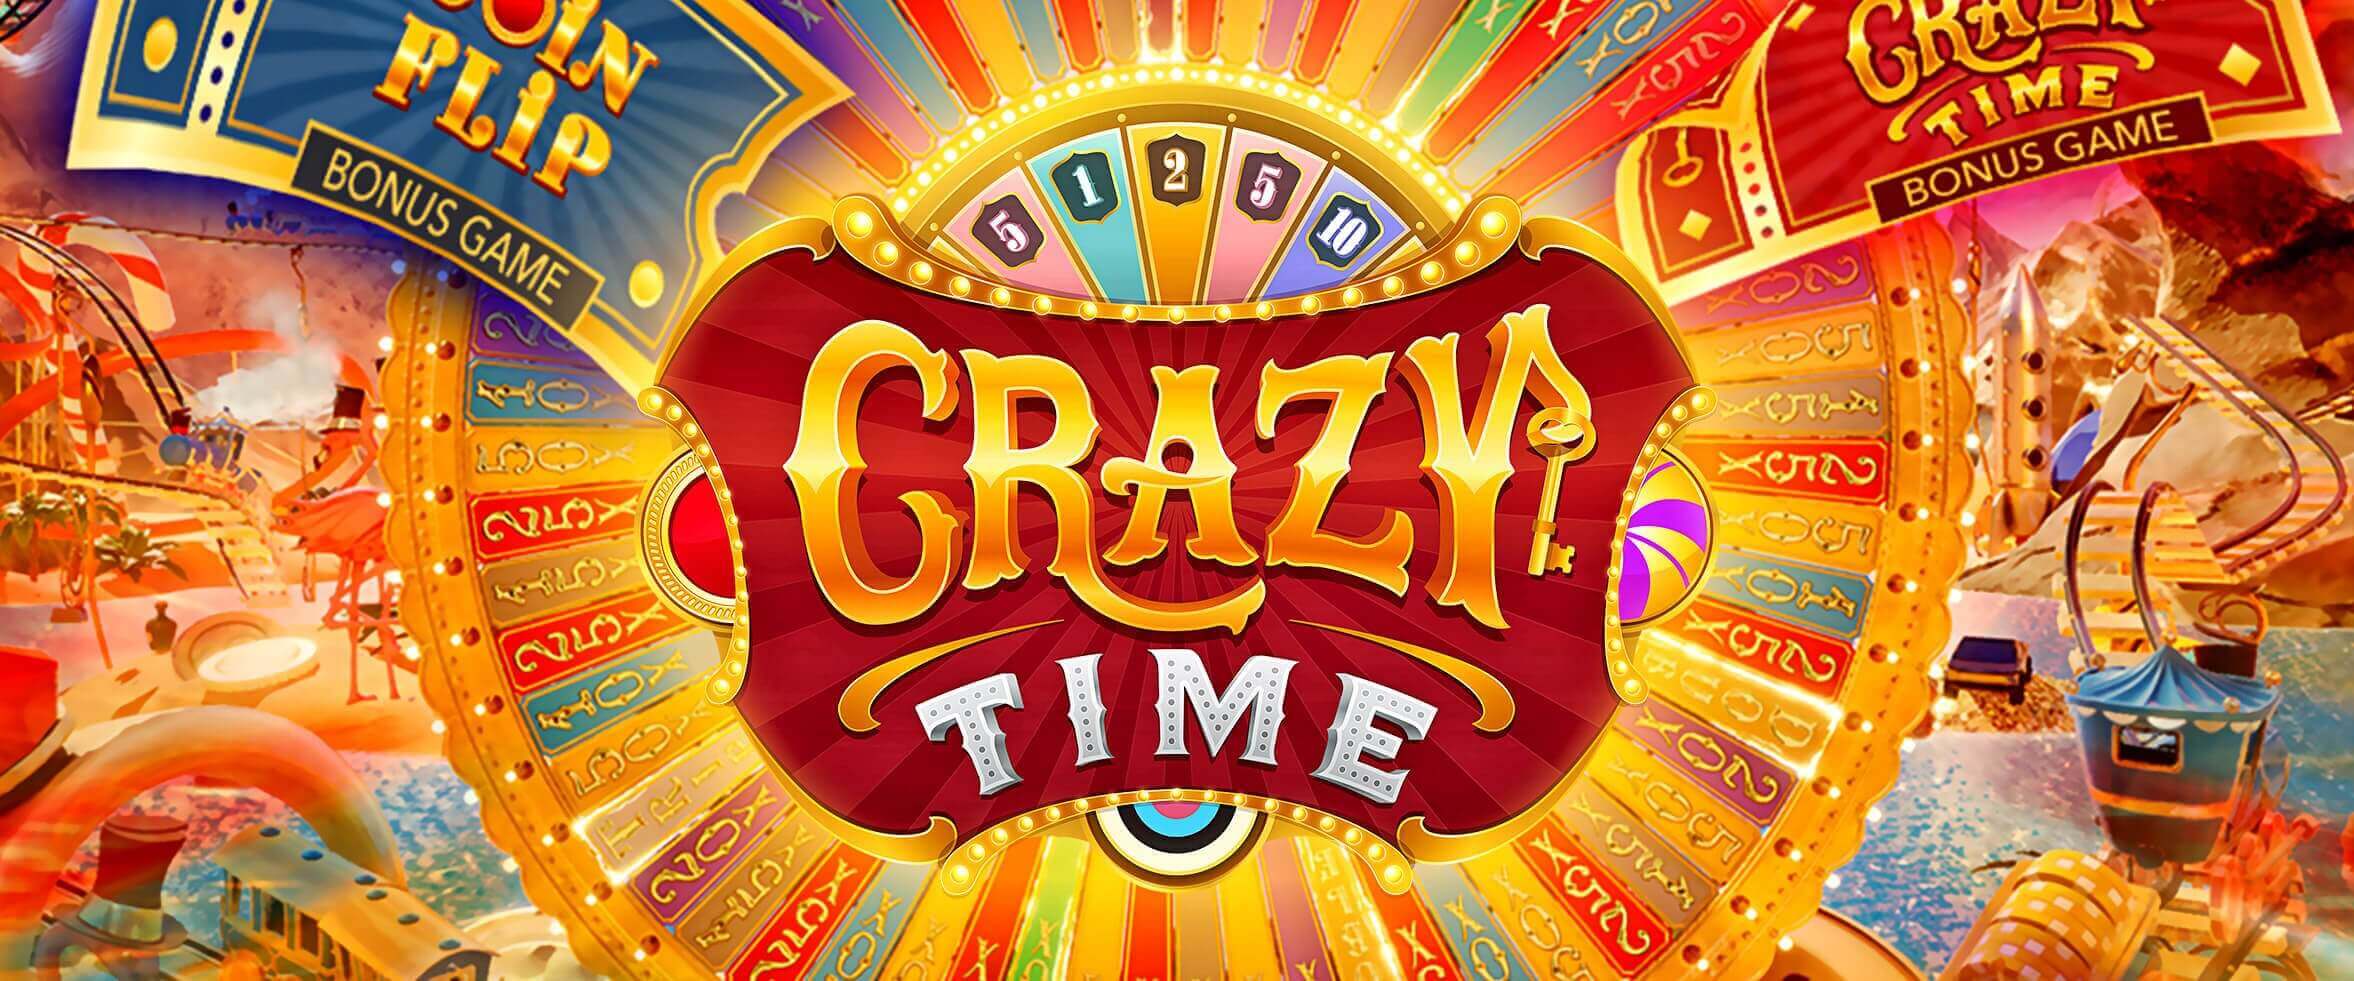 Crazy time game show Chile